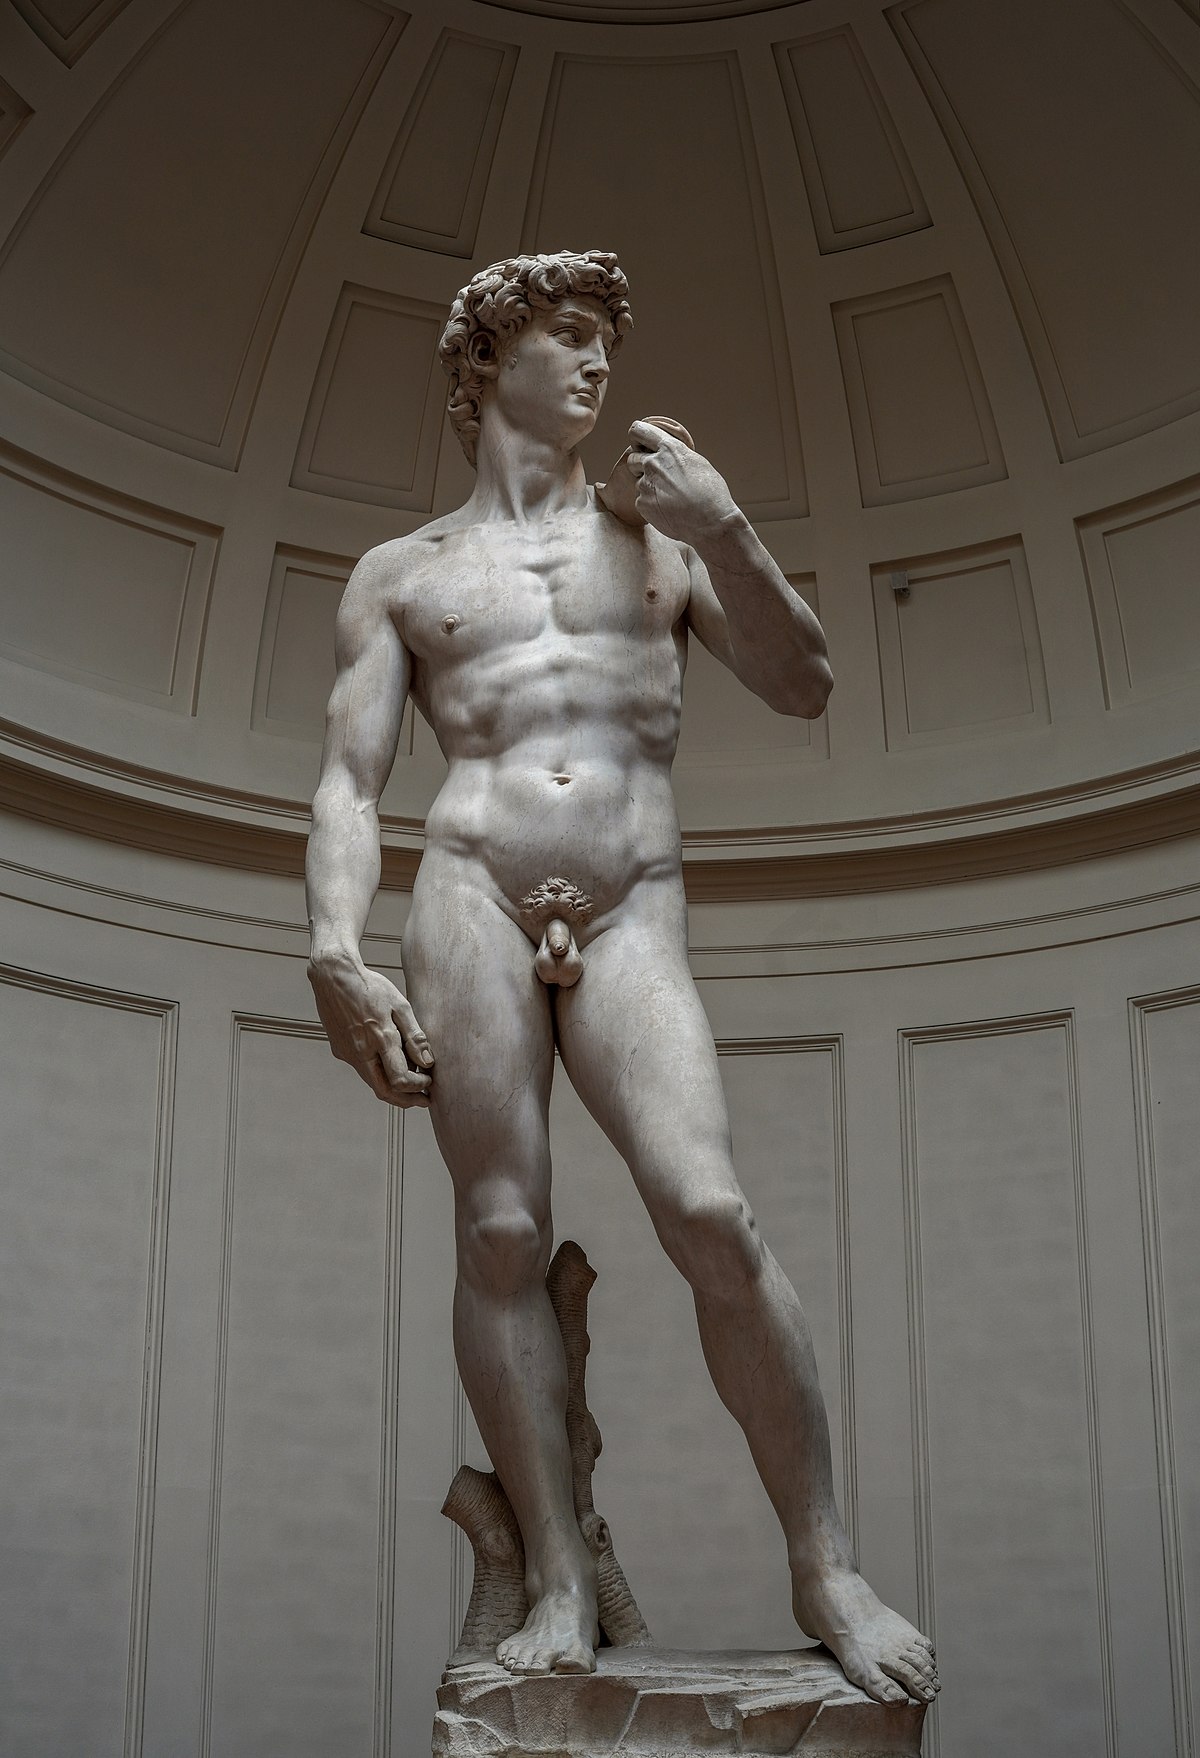 <p></p><p> <strong><em>Michelangelo, ______, 1501-1504, marble, Galleria dell’Accademia, Florence, Italy</em></strong></p>